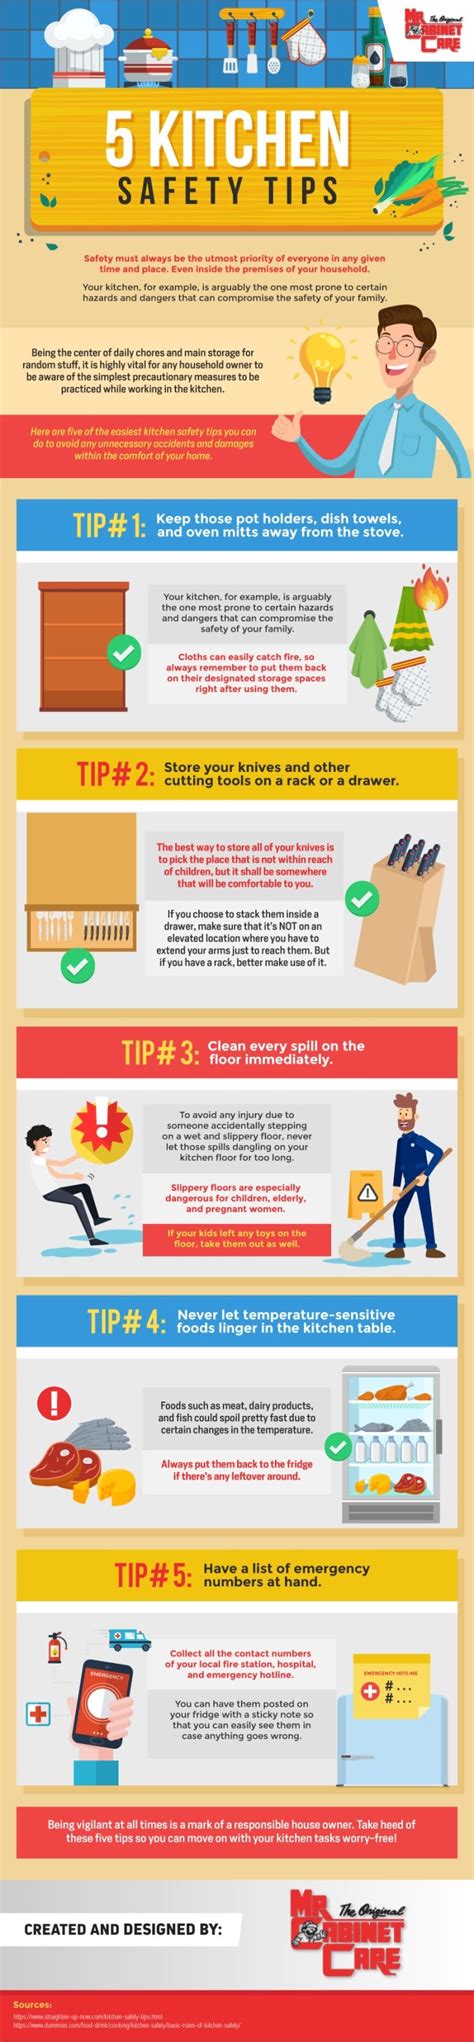 5 Kitchen Safety Tips Infographic Trionds